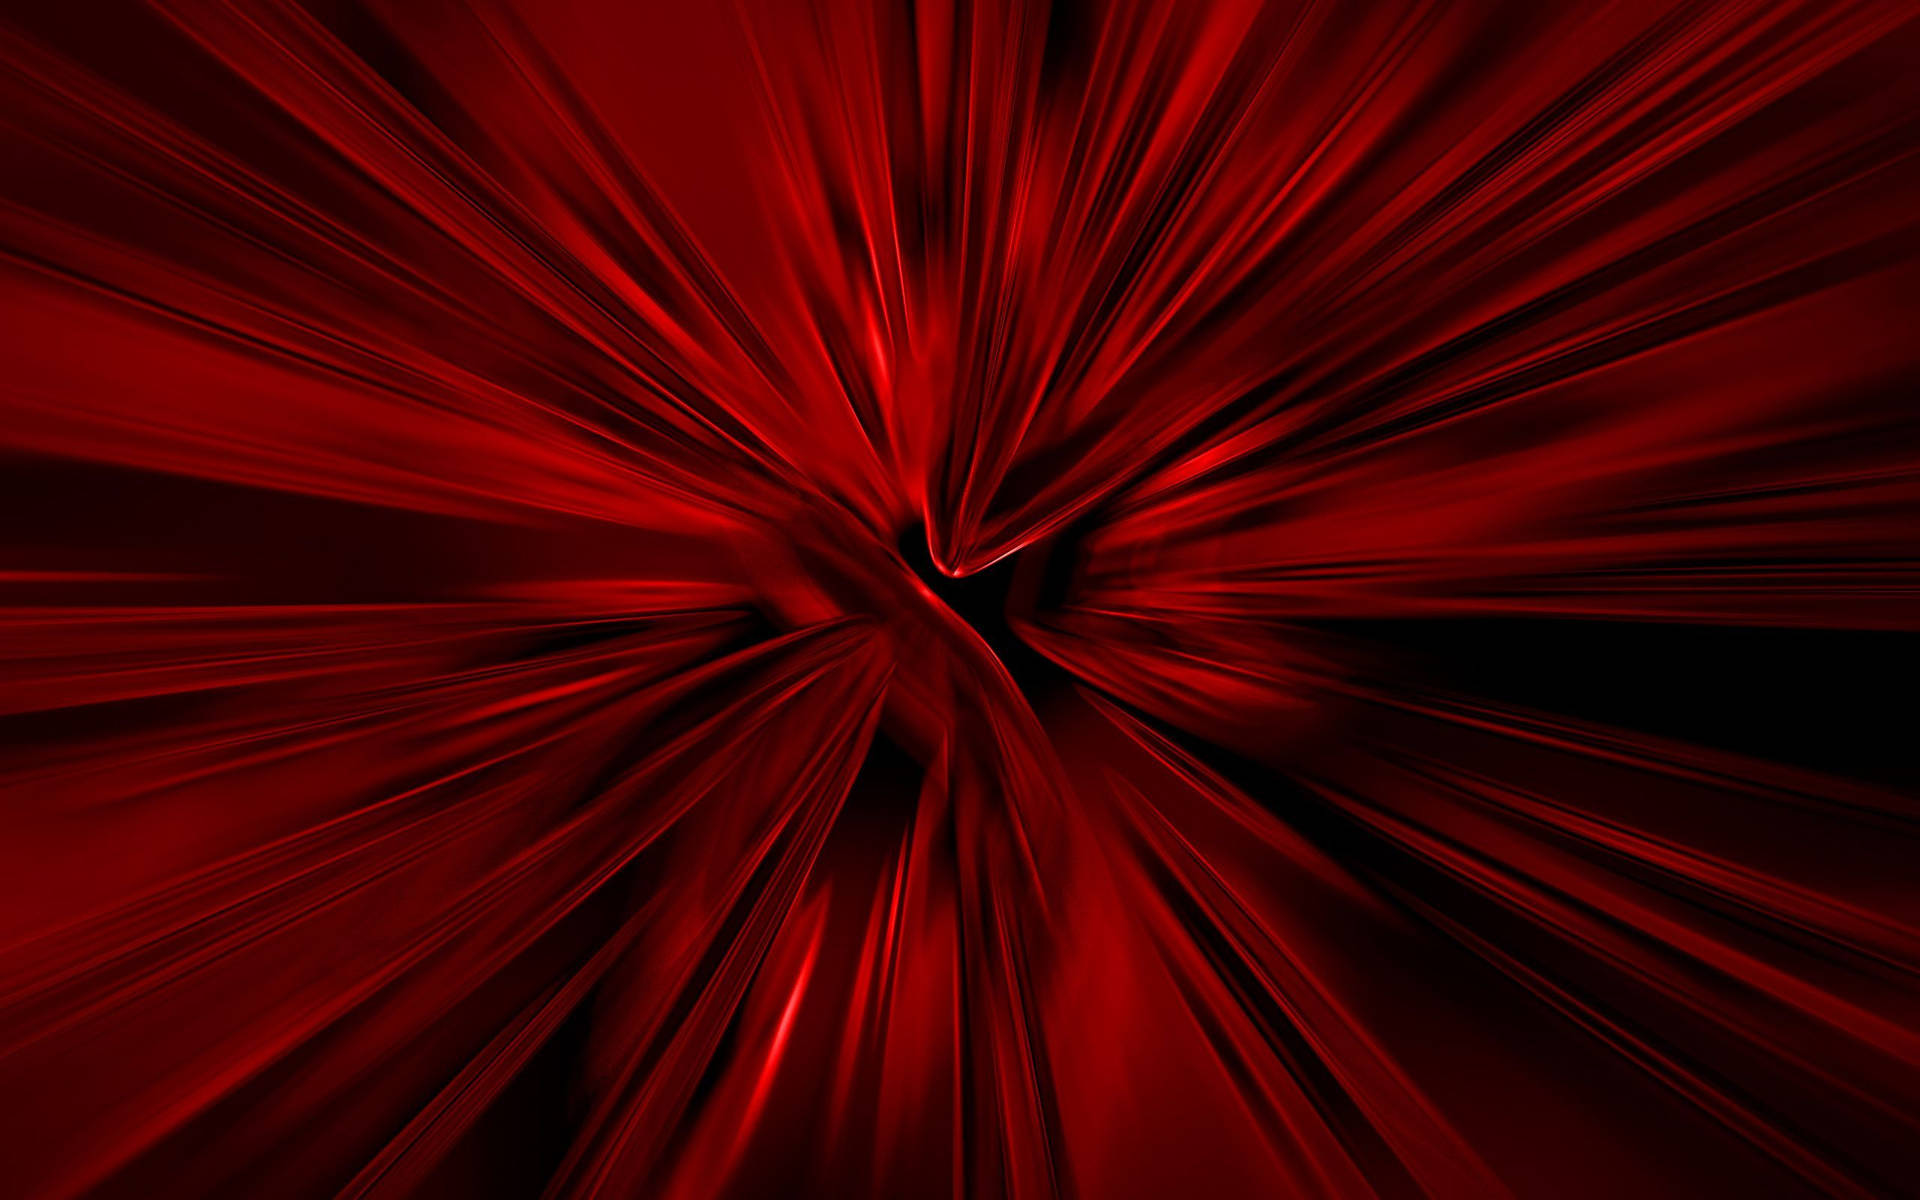 Flash Of Cool Red Light On Black Wallpaper